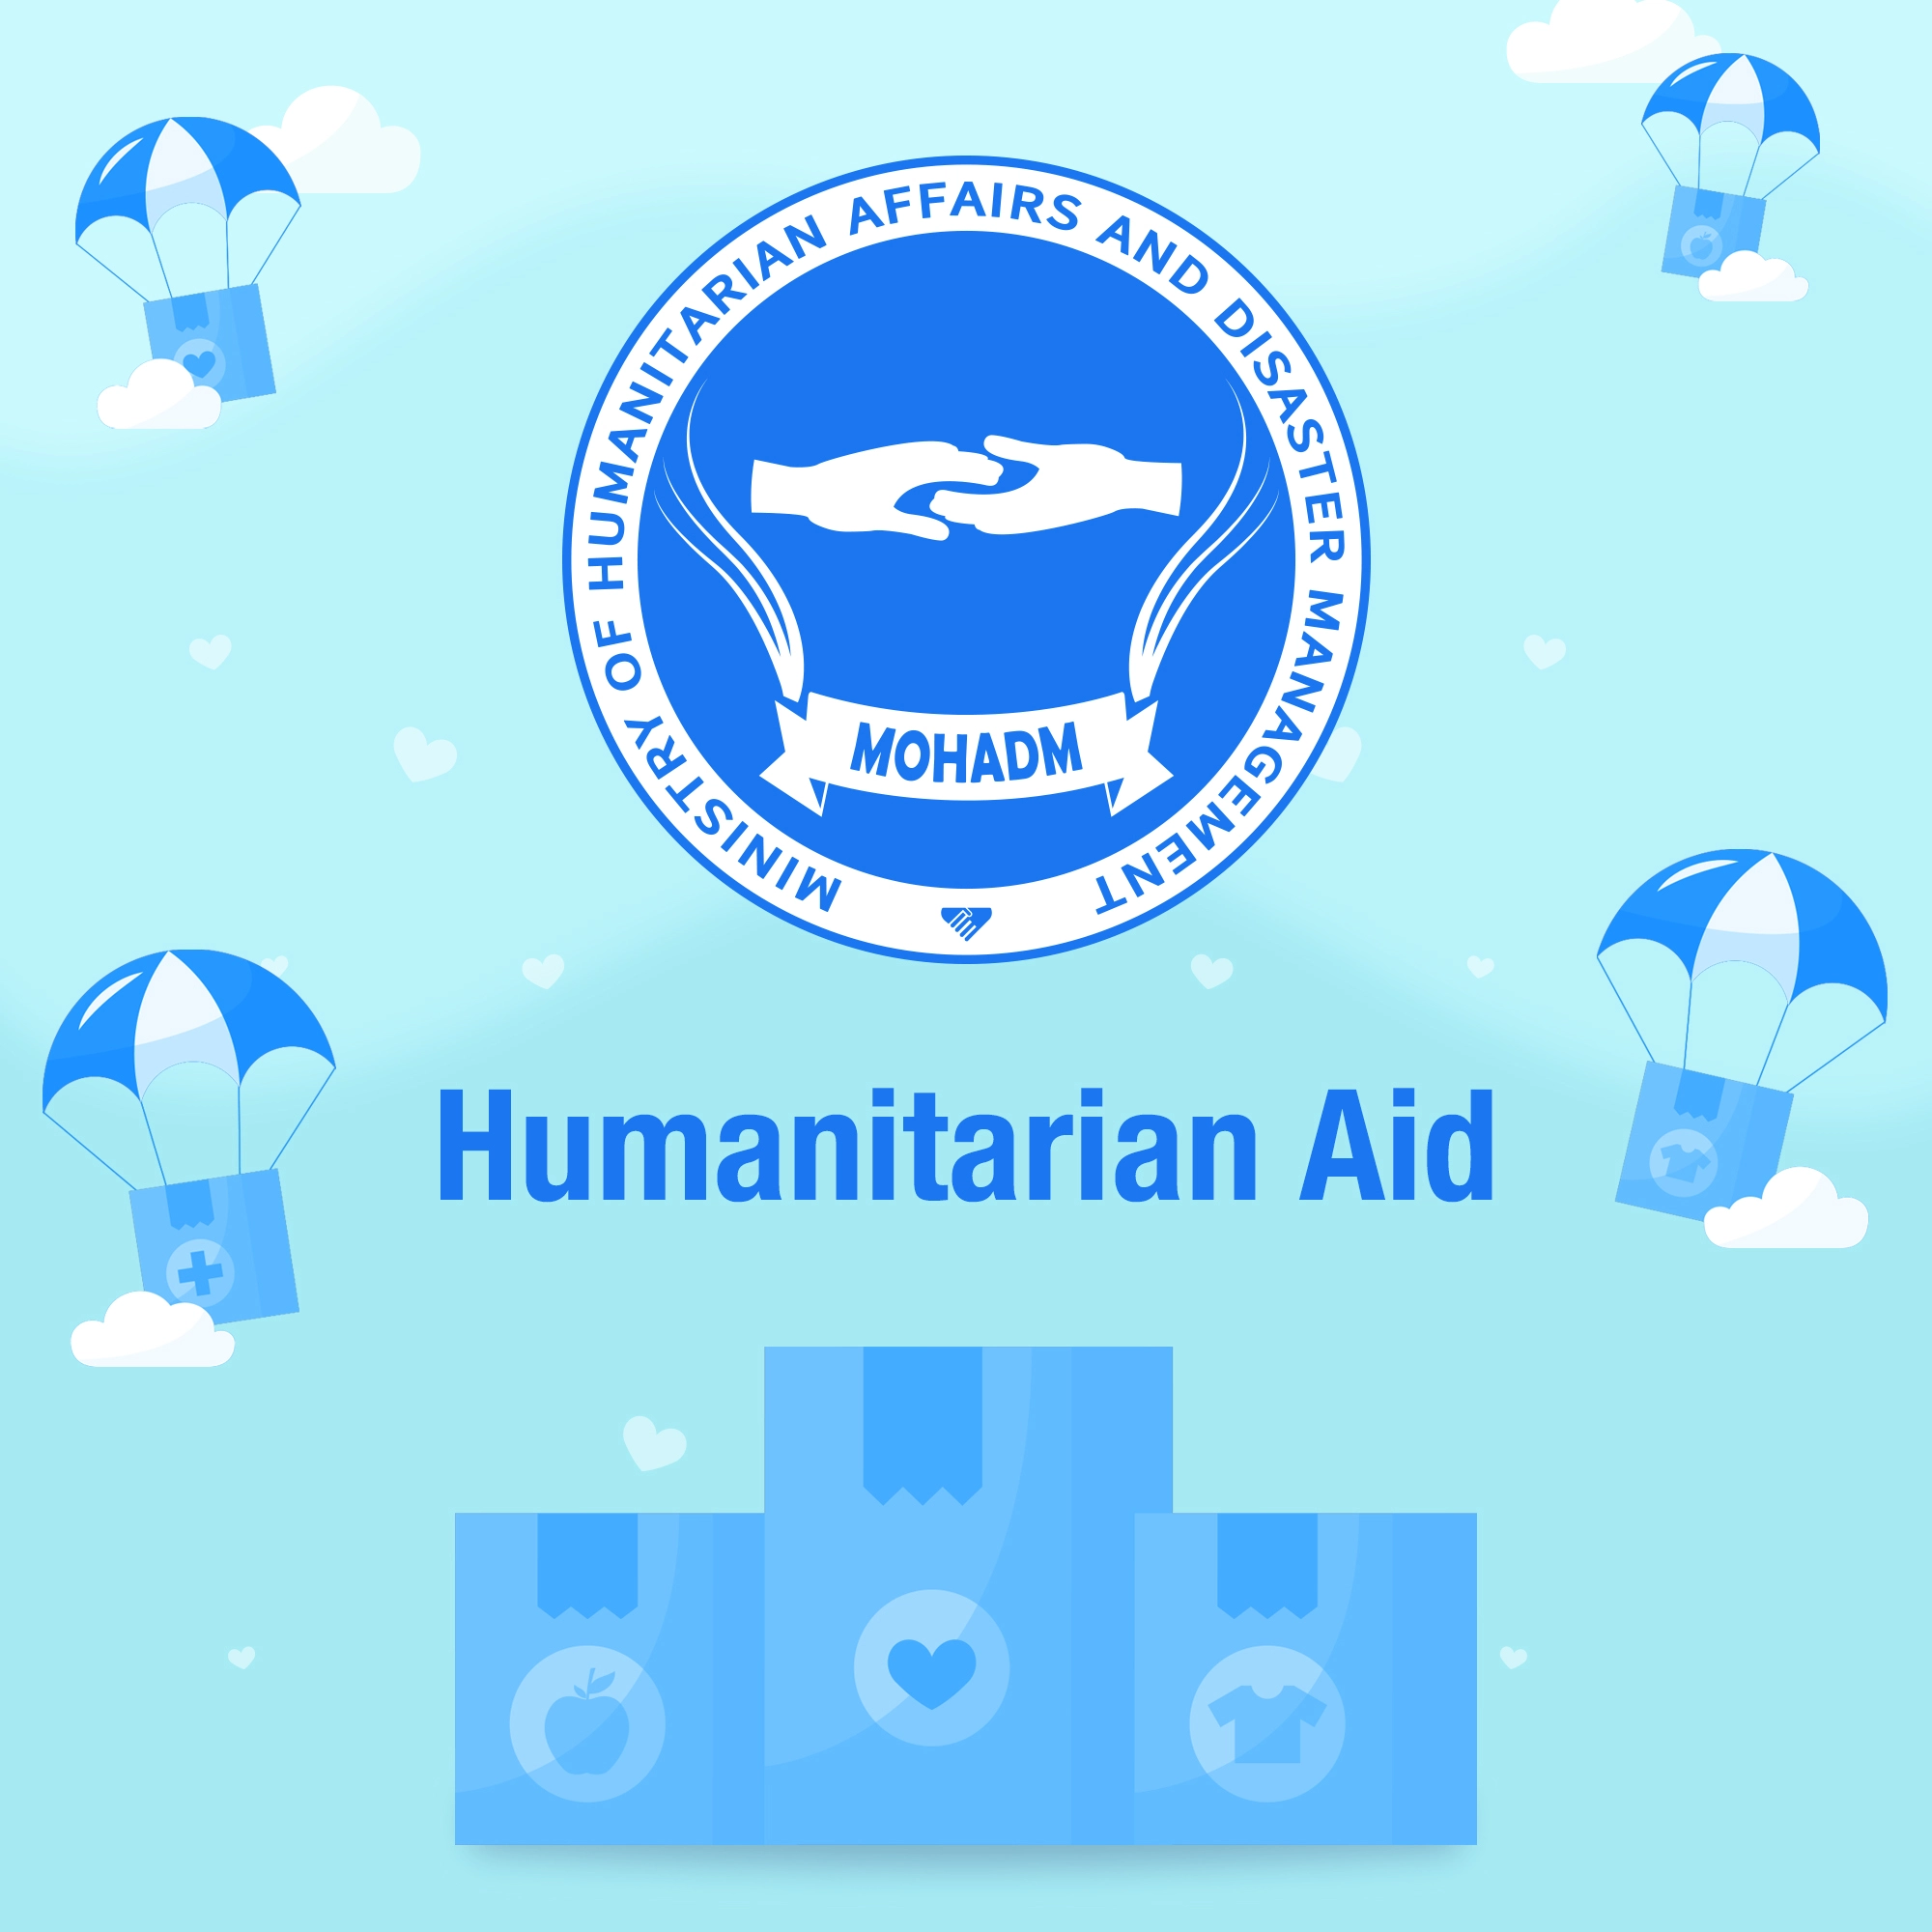 Humanitarian aid for people affected by the flood and landslide